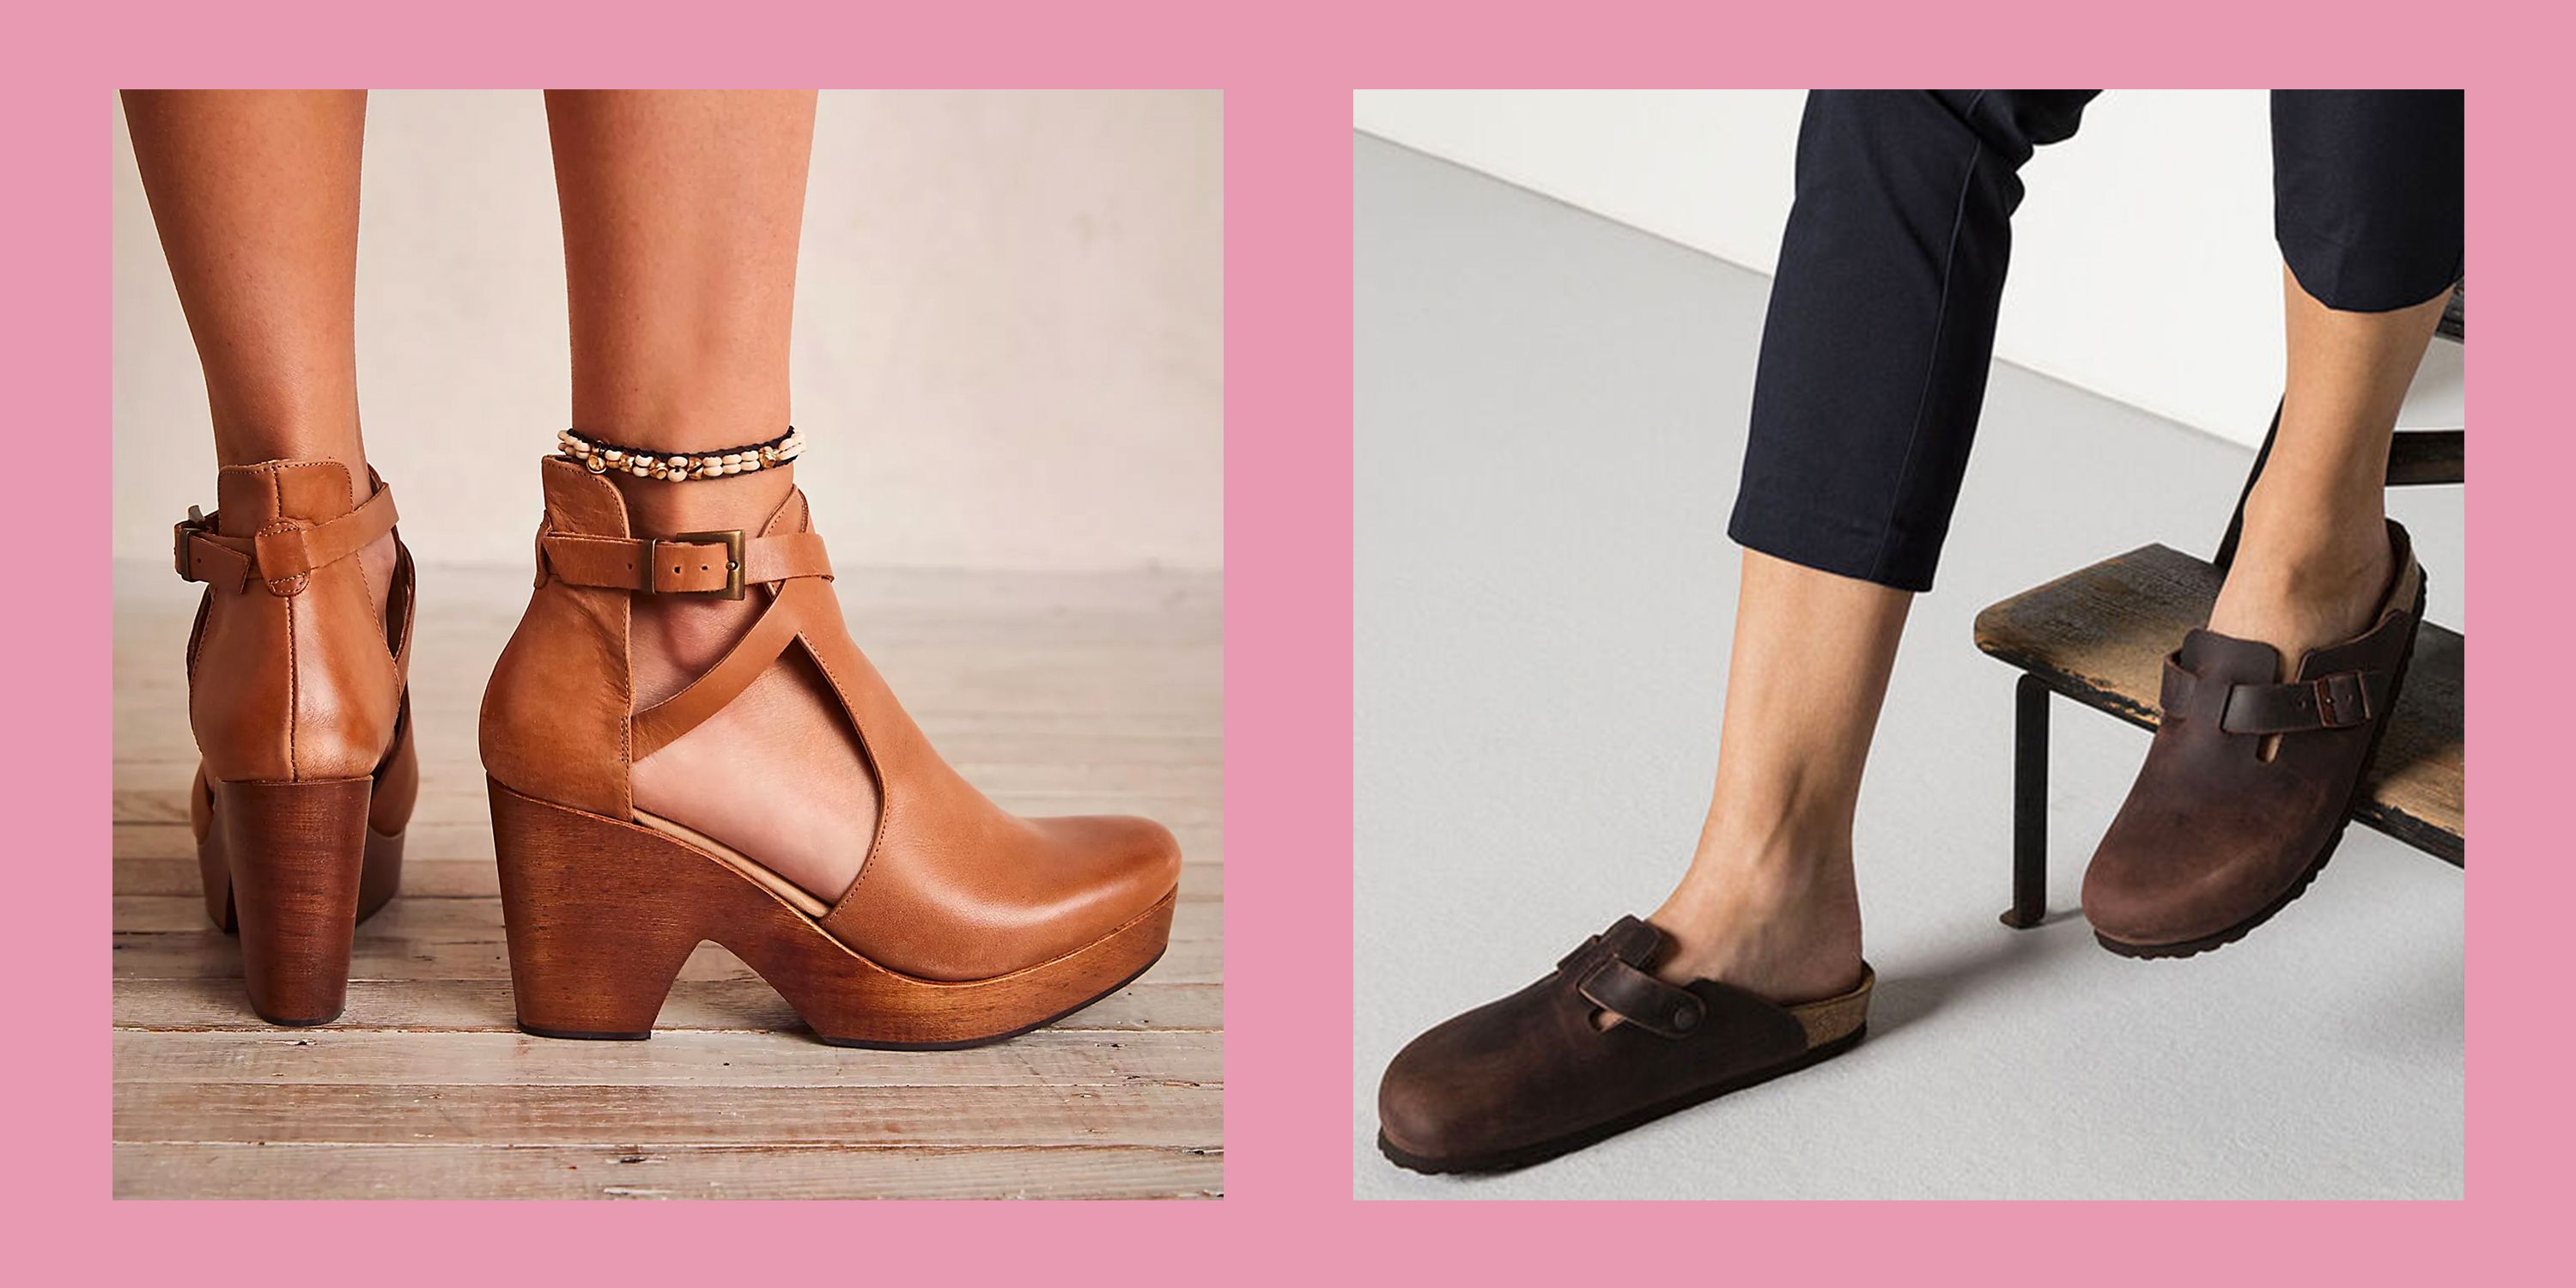 Best Clogs For Women 2023: The Best Women's Clogs To Buy Now